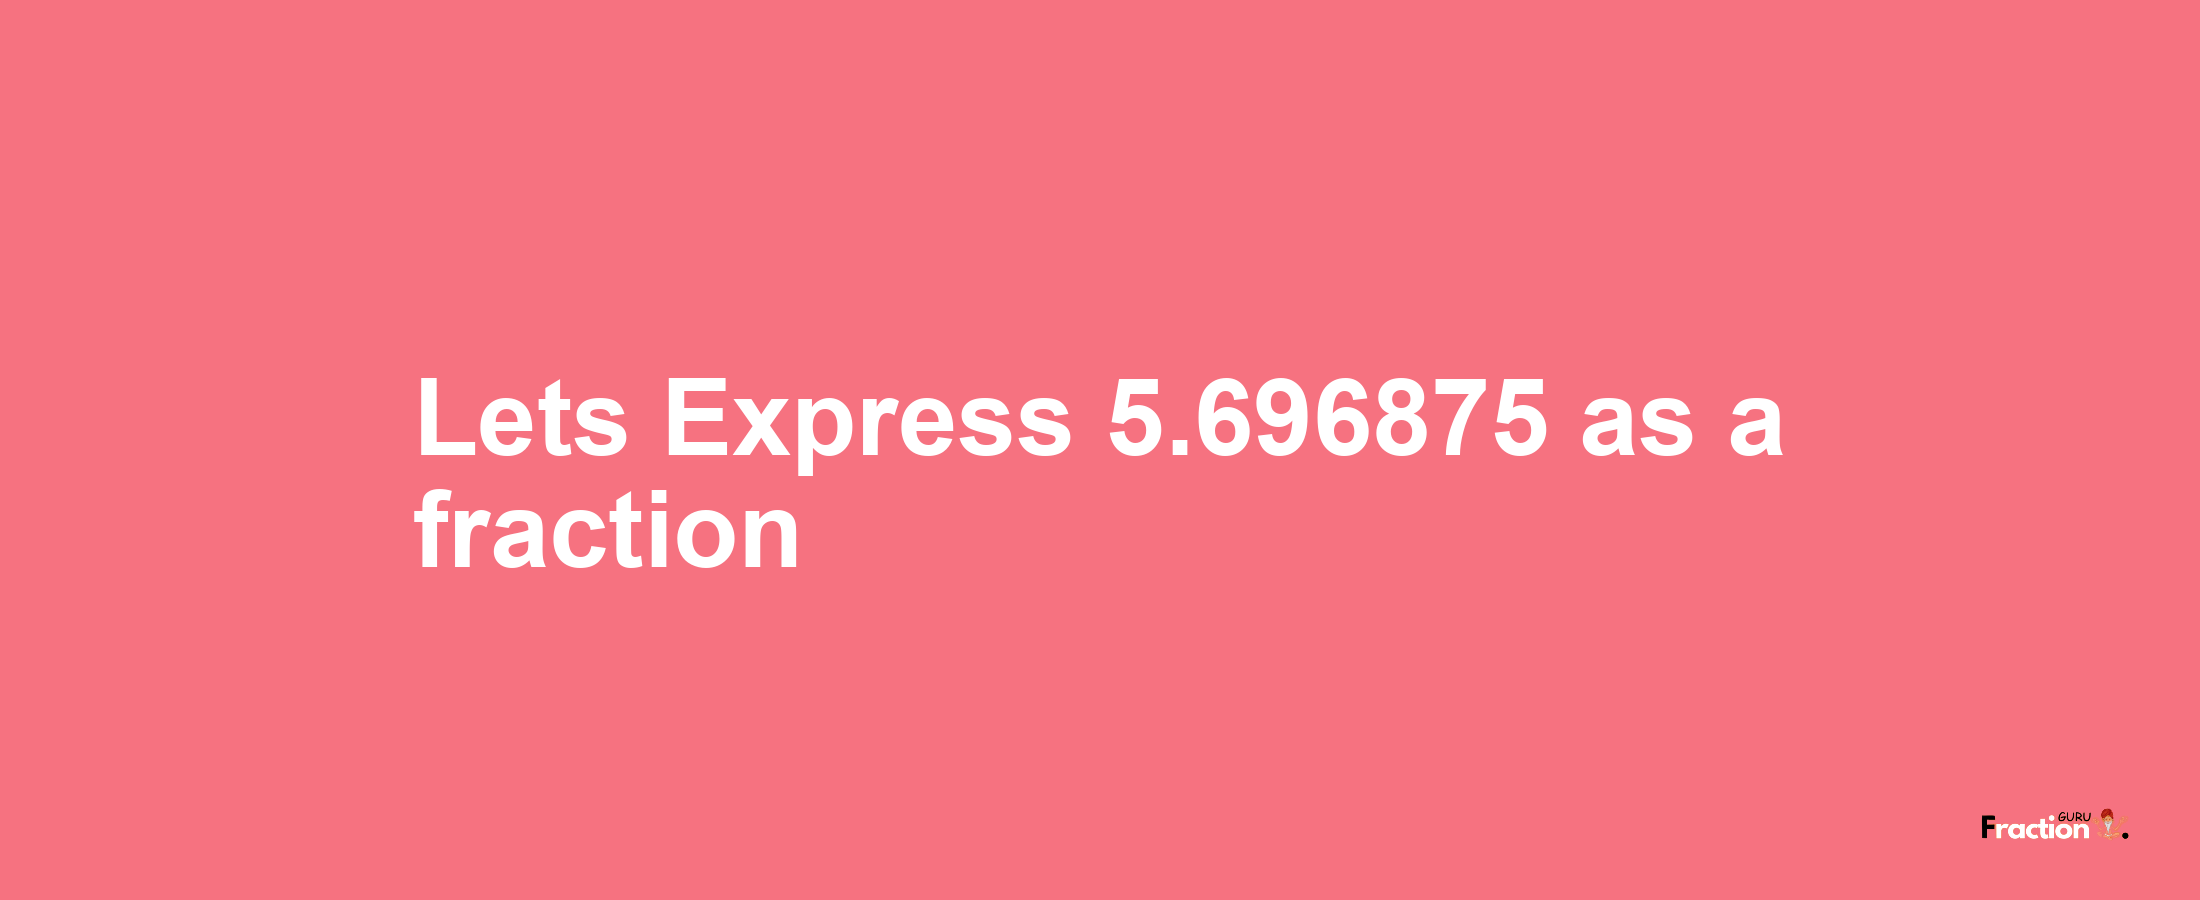 Lets Express 5.696875 as afraction